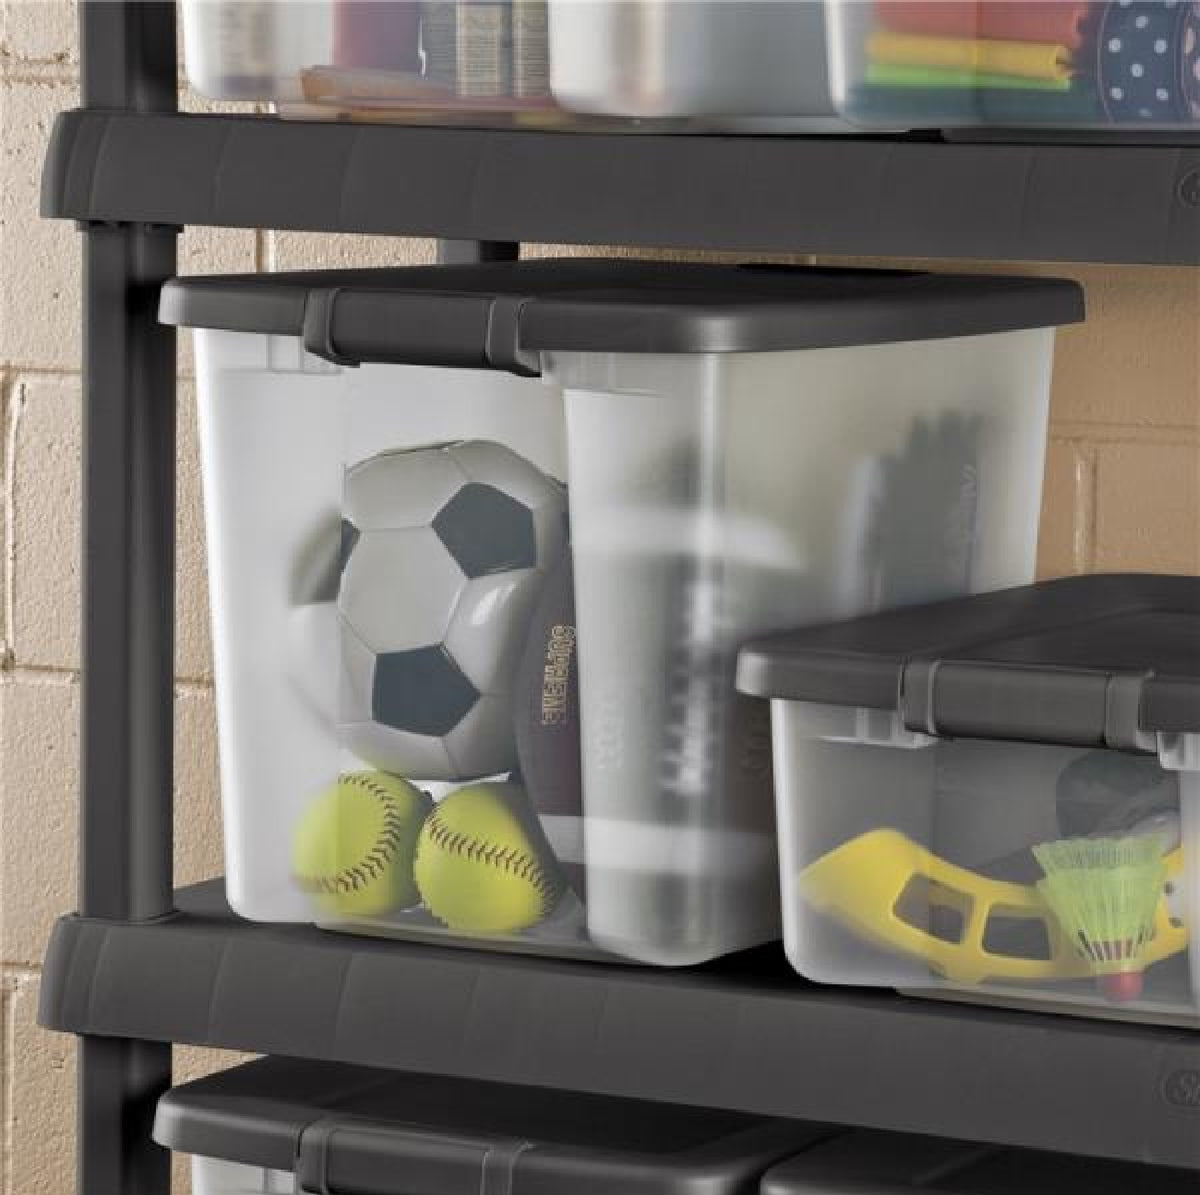 buy storage containers at cheap rate in bulk. wholesale & retail storage & organizers supplies store.